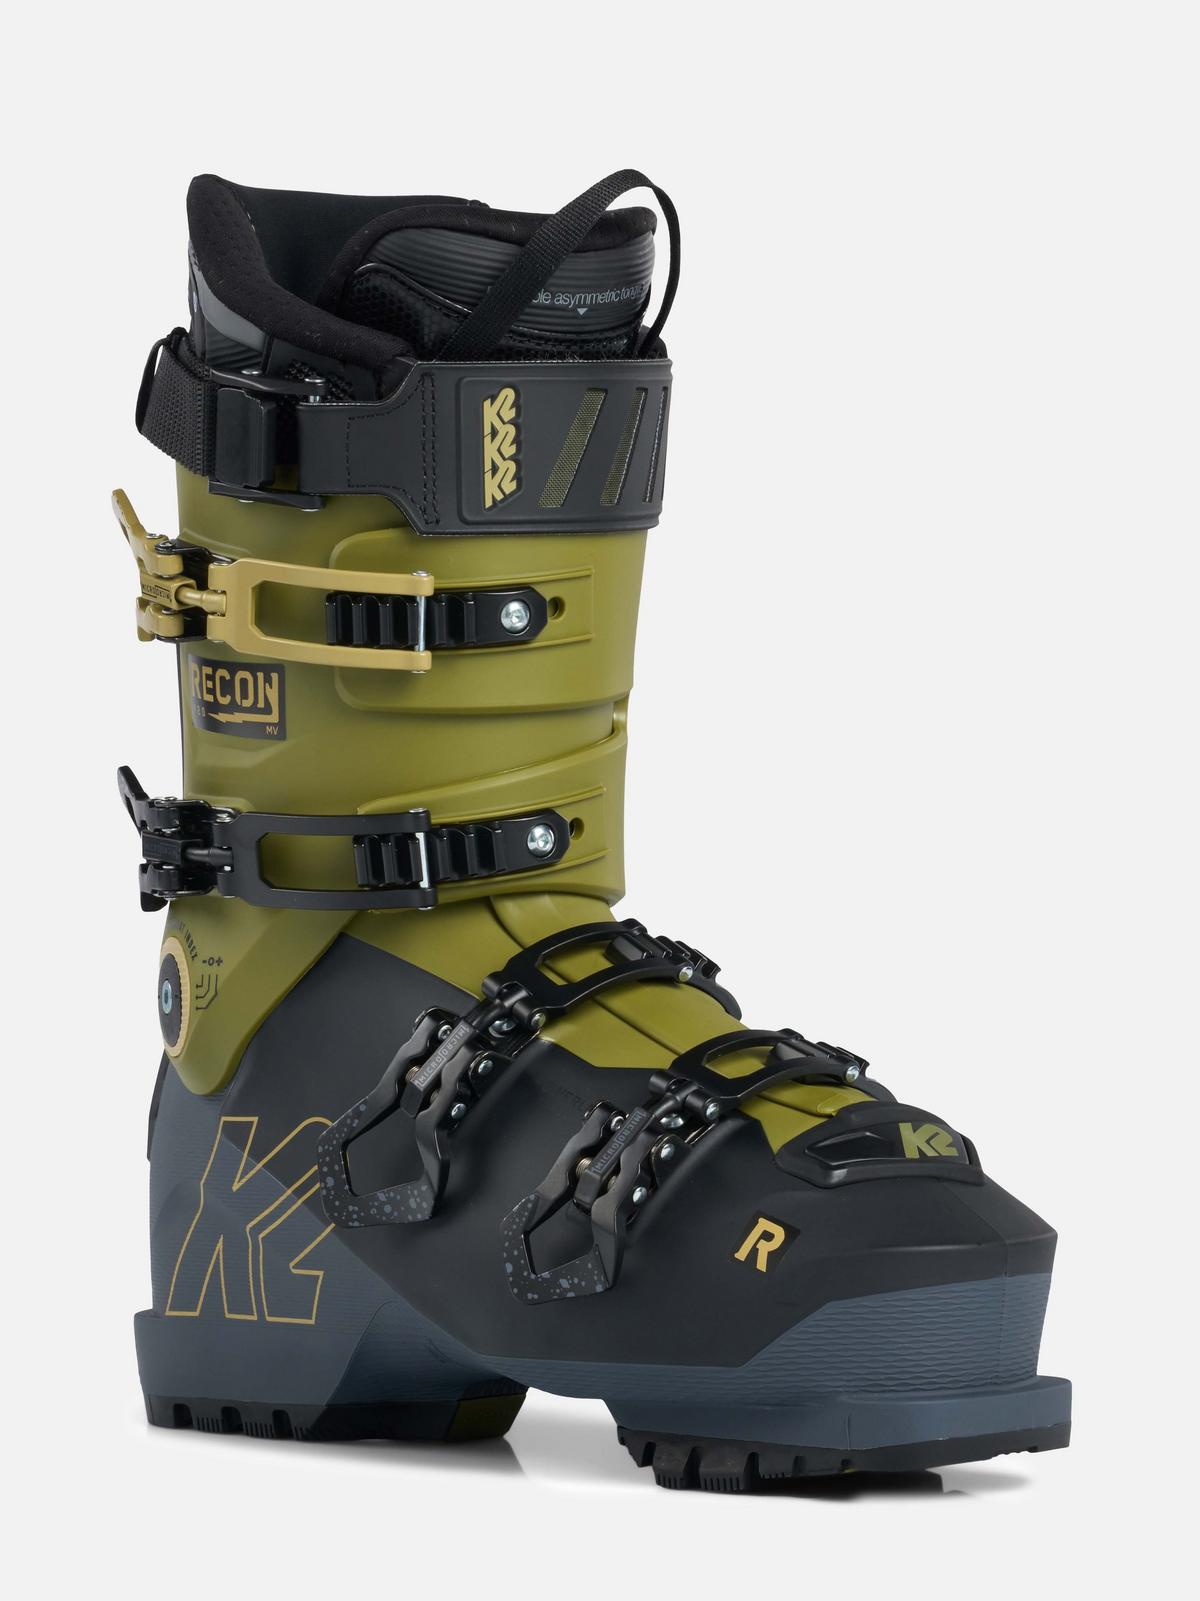 Recon 120 Heat Ski Boots | K2 Skis and K2 Snowboarding